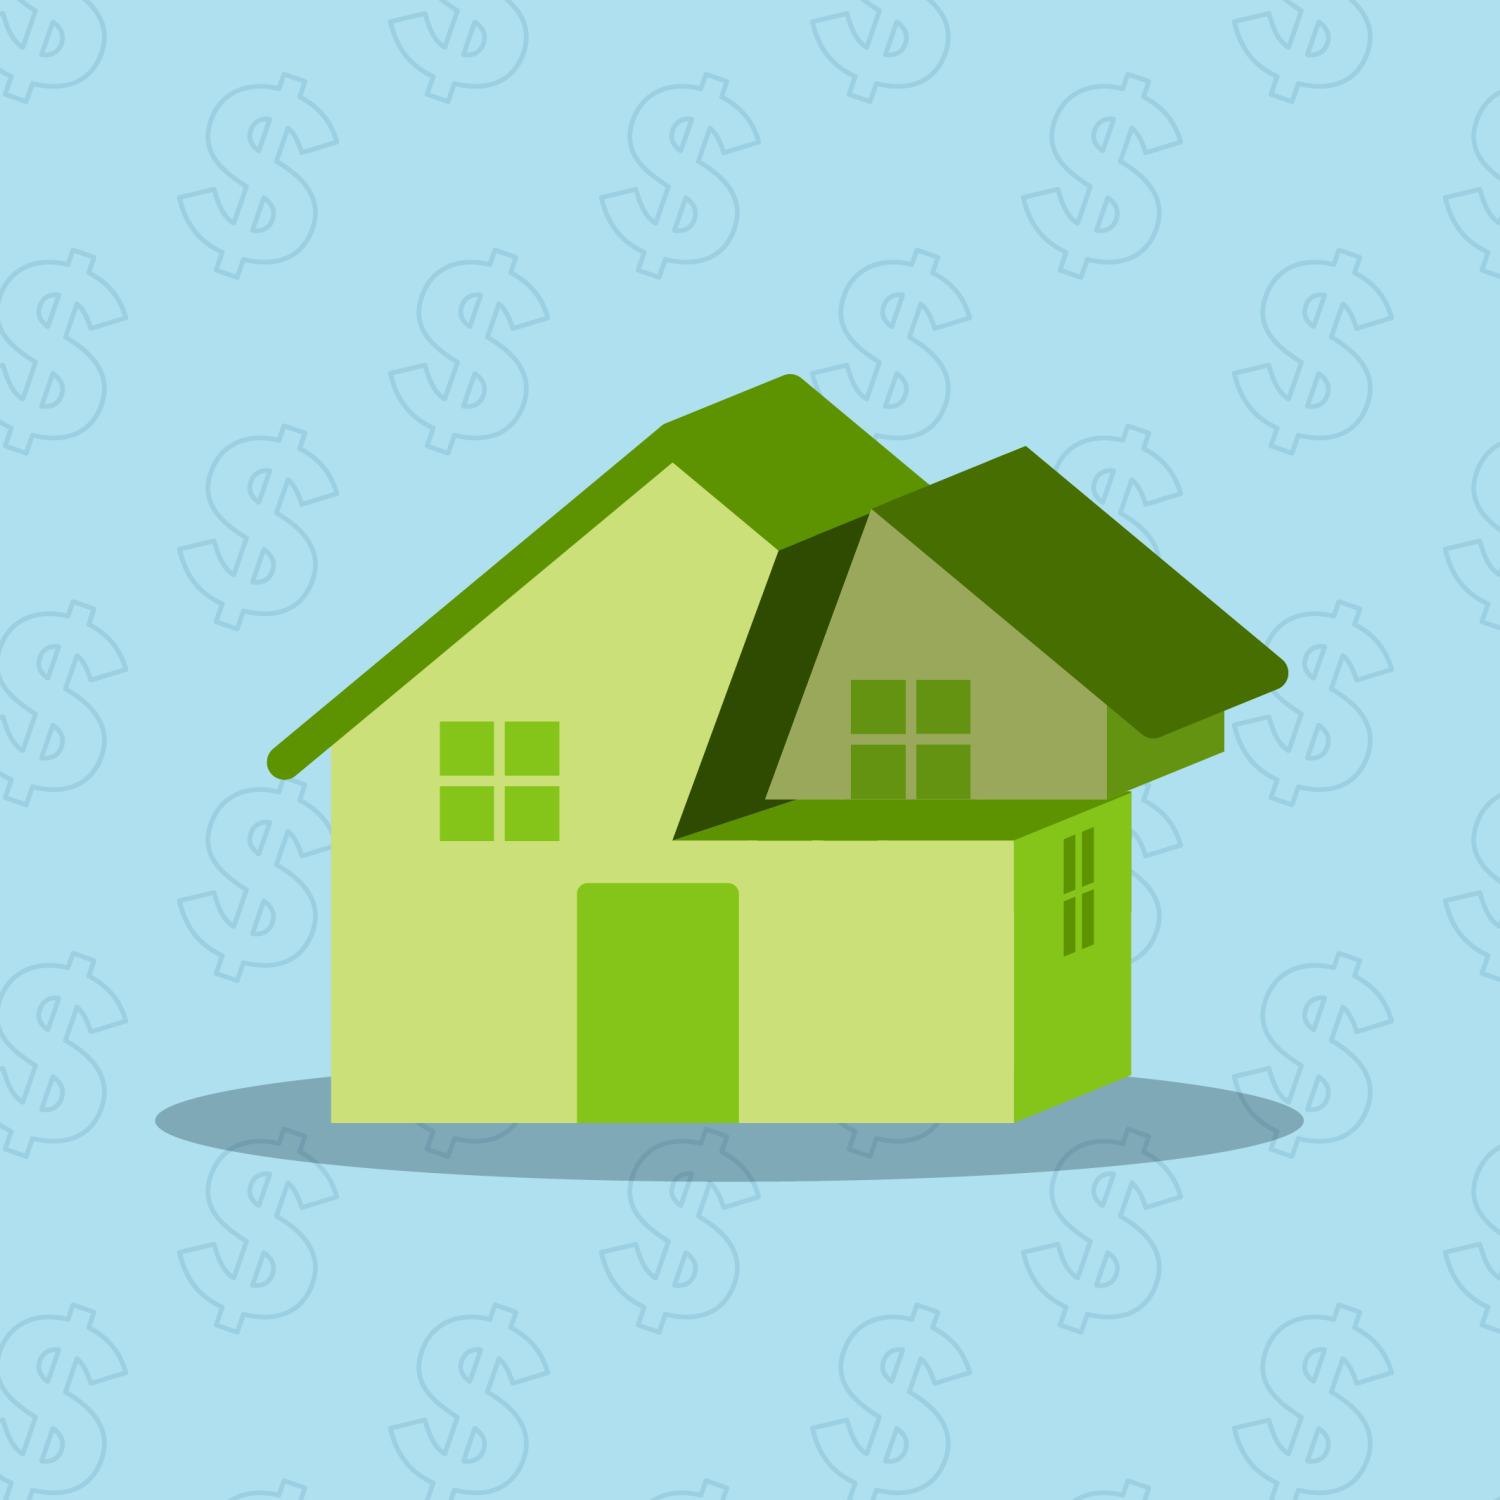 Graphic of a green house with a blue background featuring dollar signs.